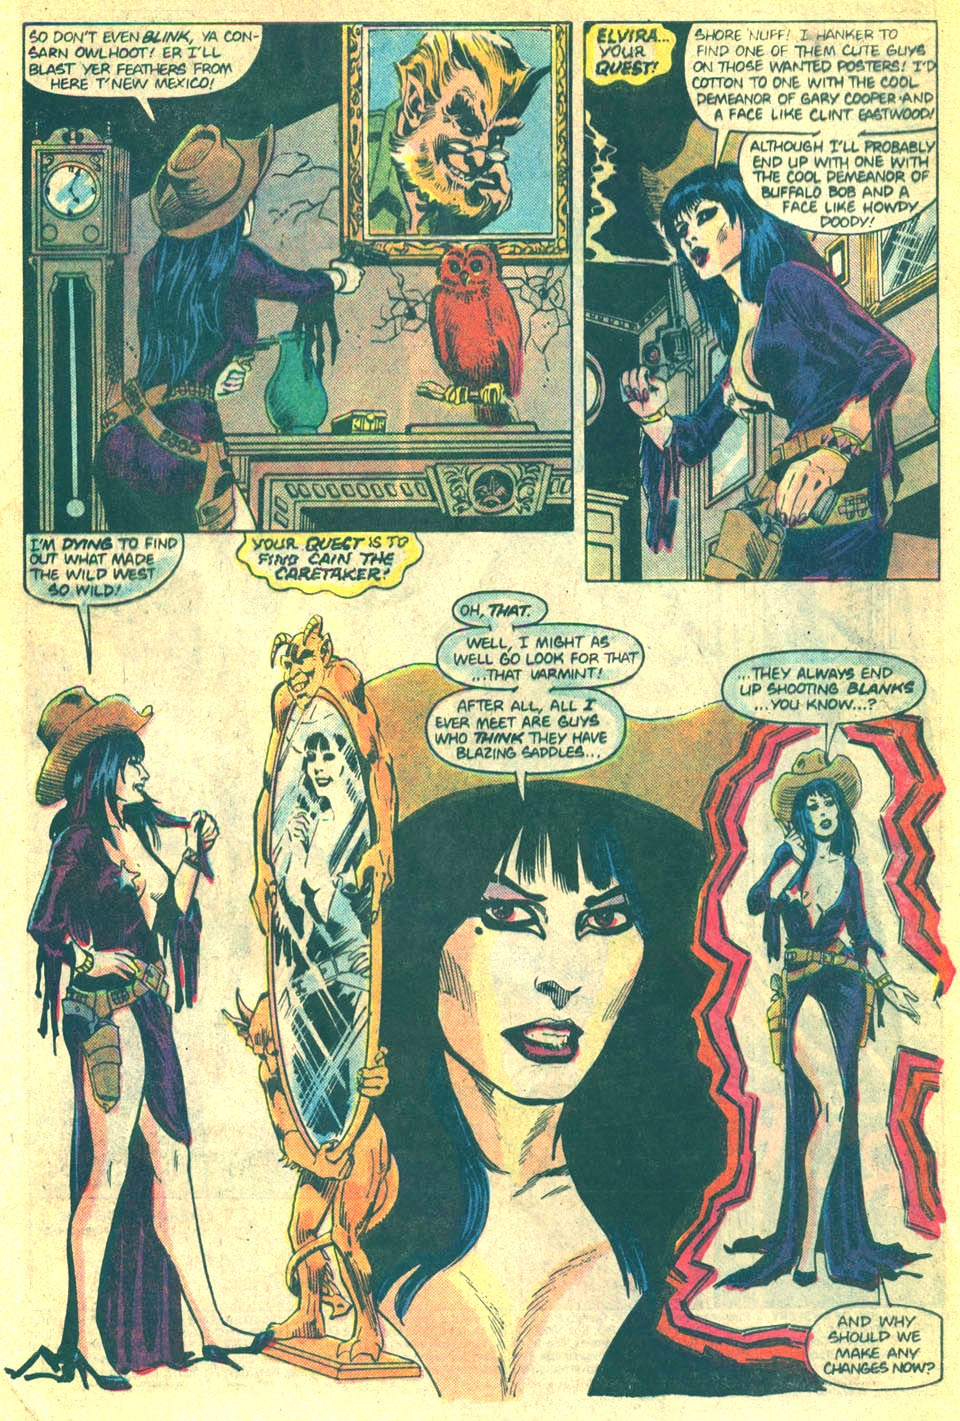 Read online Elvira's House of Mystery comic -  Issue #3 - 4